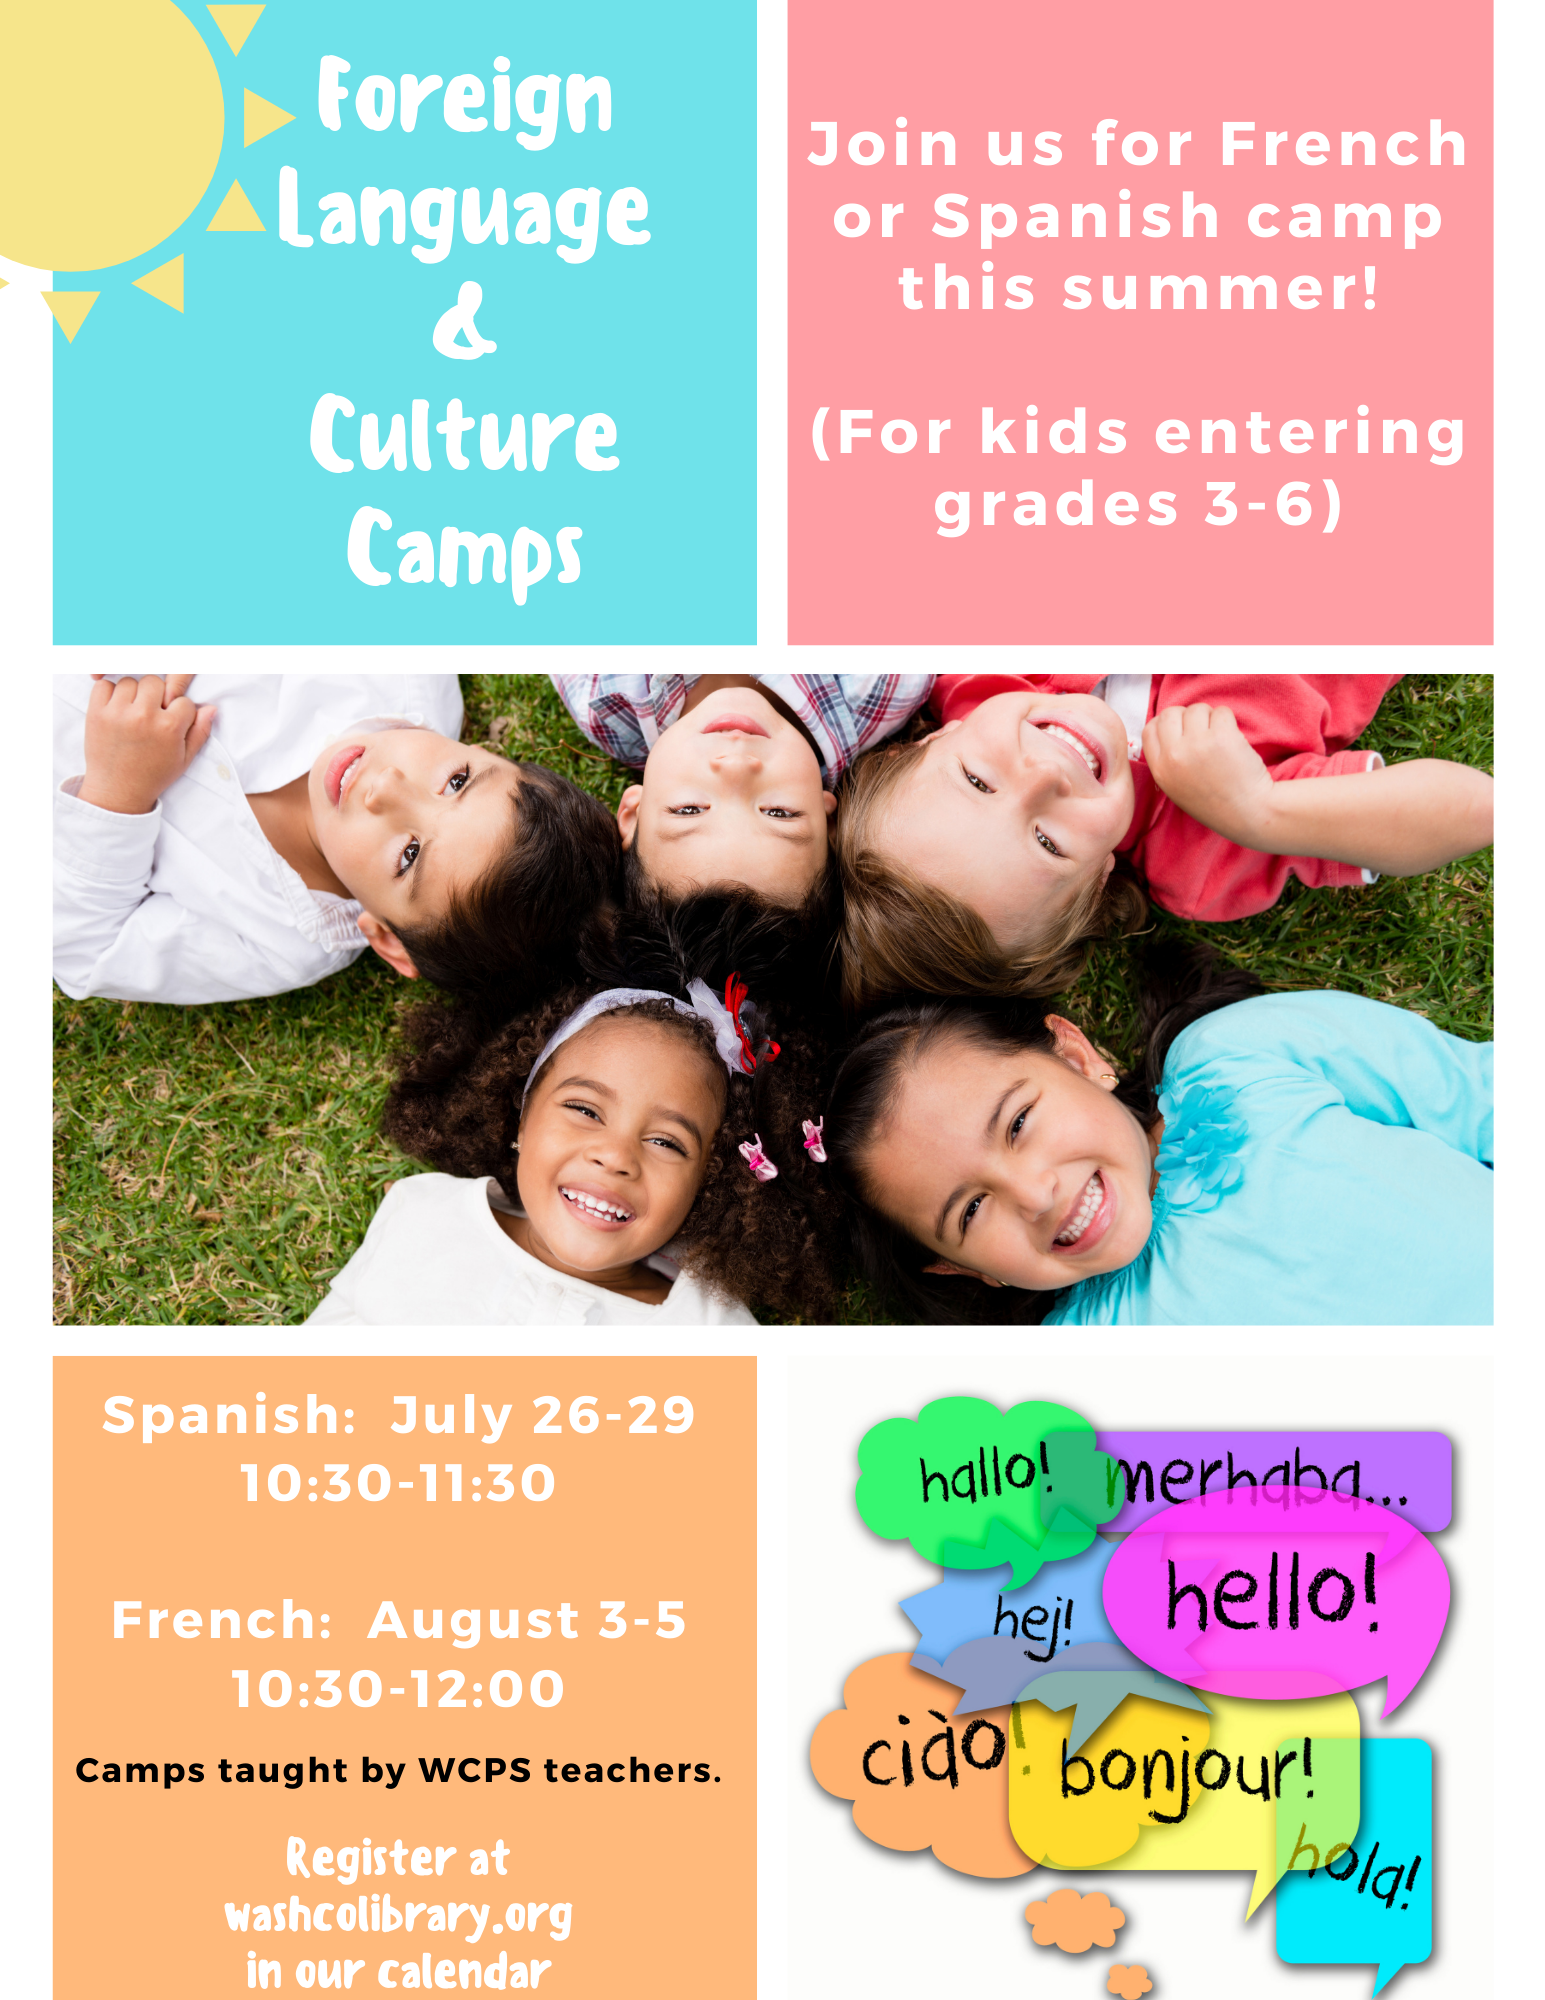 French Foreign Language Camp